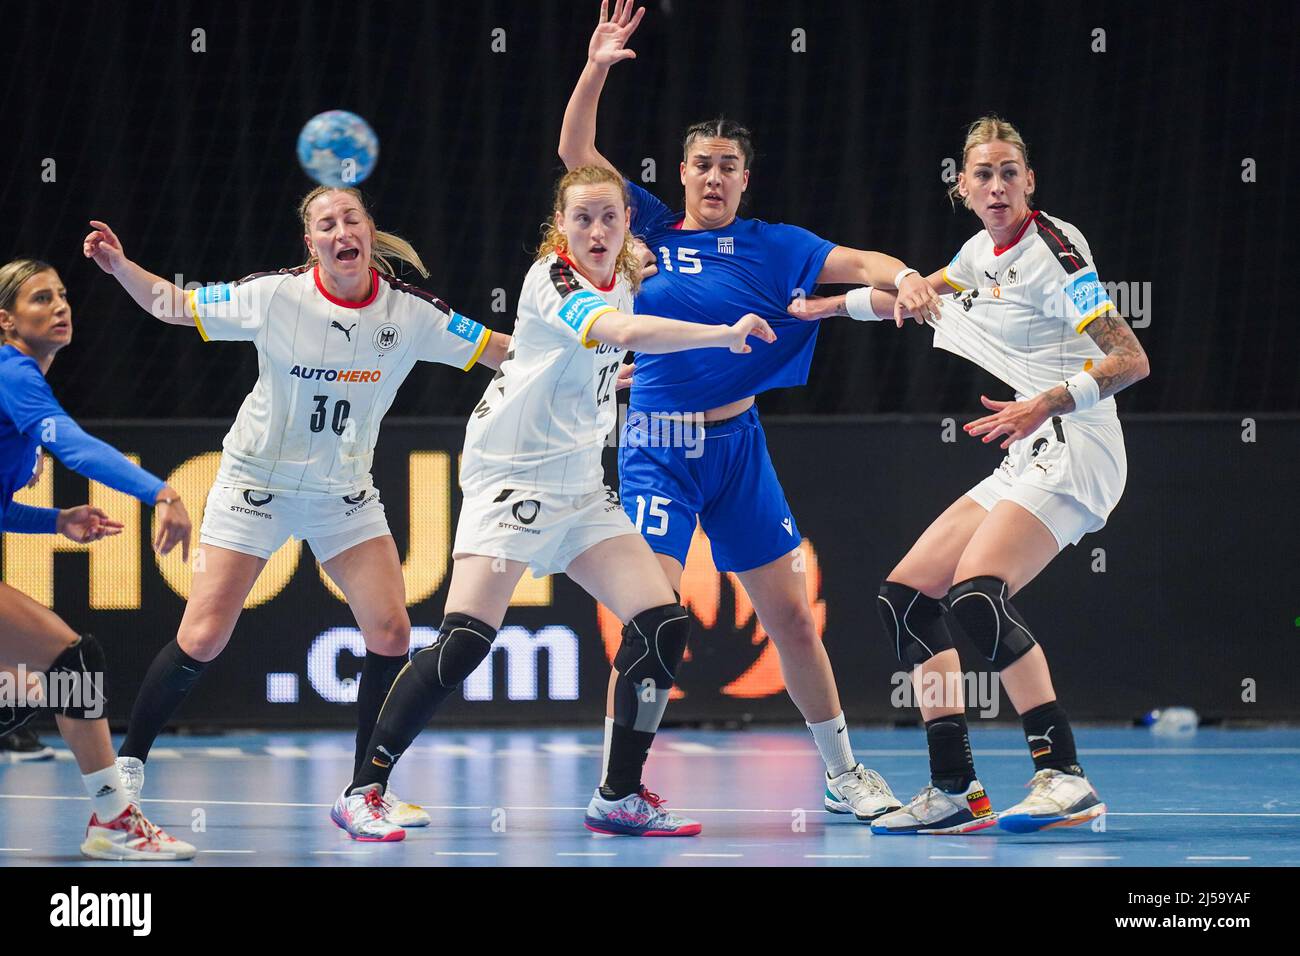 Almere, Netherlands. 21st Apr, 2022. ALMERE, NETHERLANDS - APRIL 21: Jenny  Behrend of Germany, Maren Wiegel of Germany, Christiana Kyriklidou of  Greece and Luisa Schulze of Germany during the EHF EURO 2022